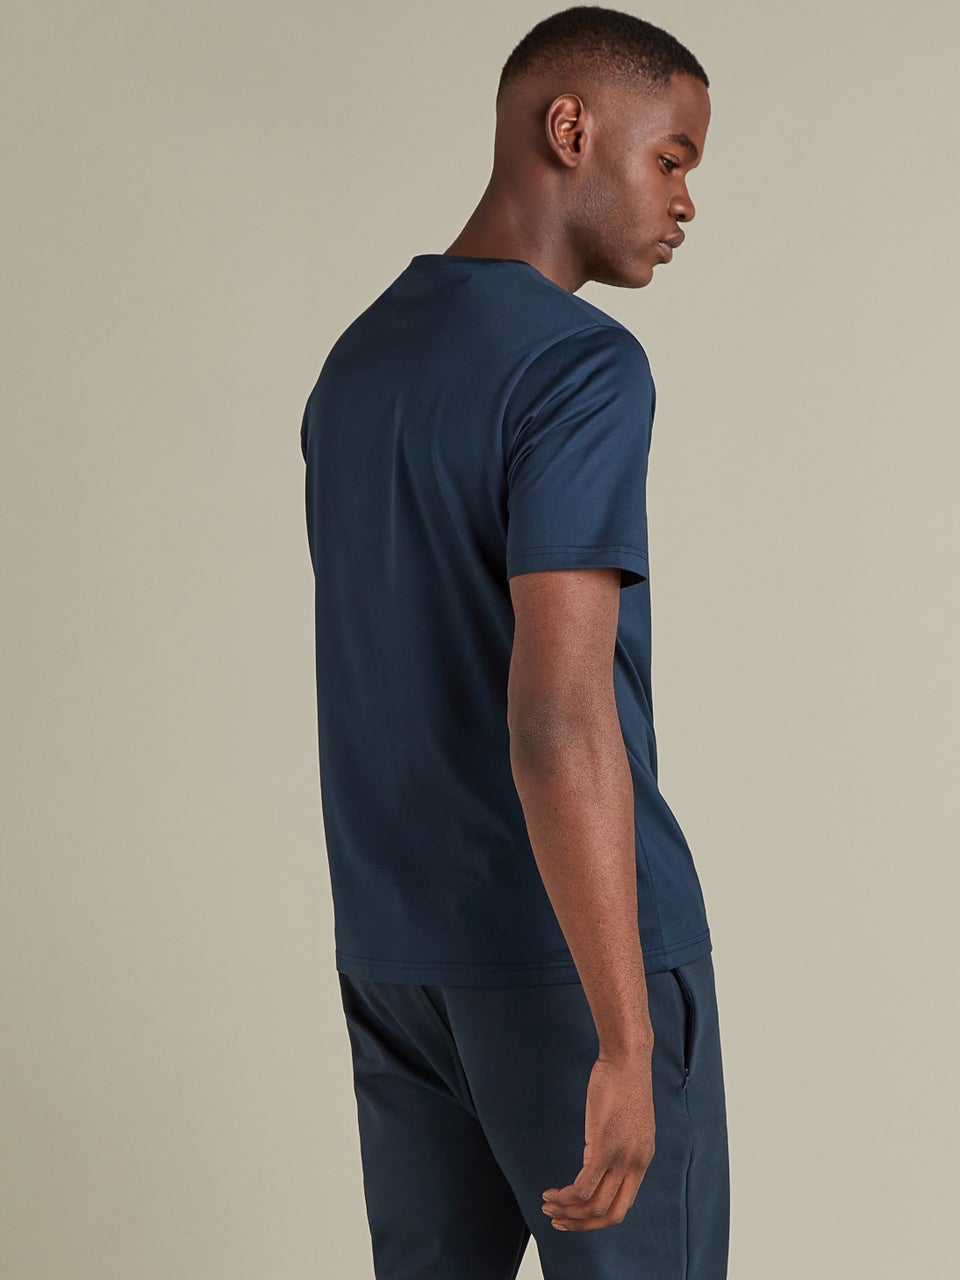 In Motion performance pique t-shirt T-shirt Navy